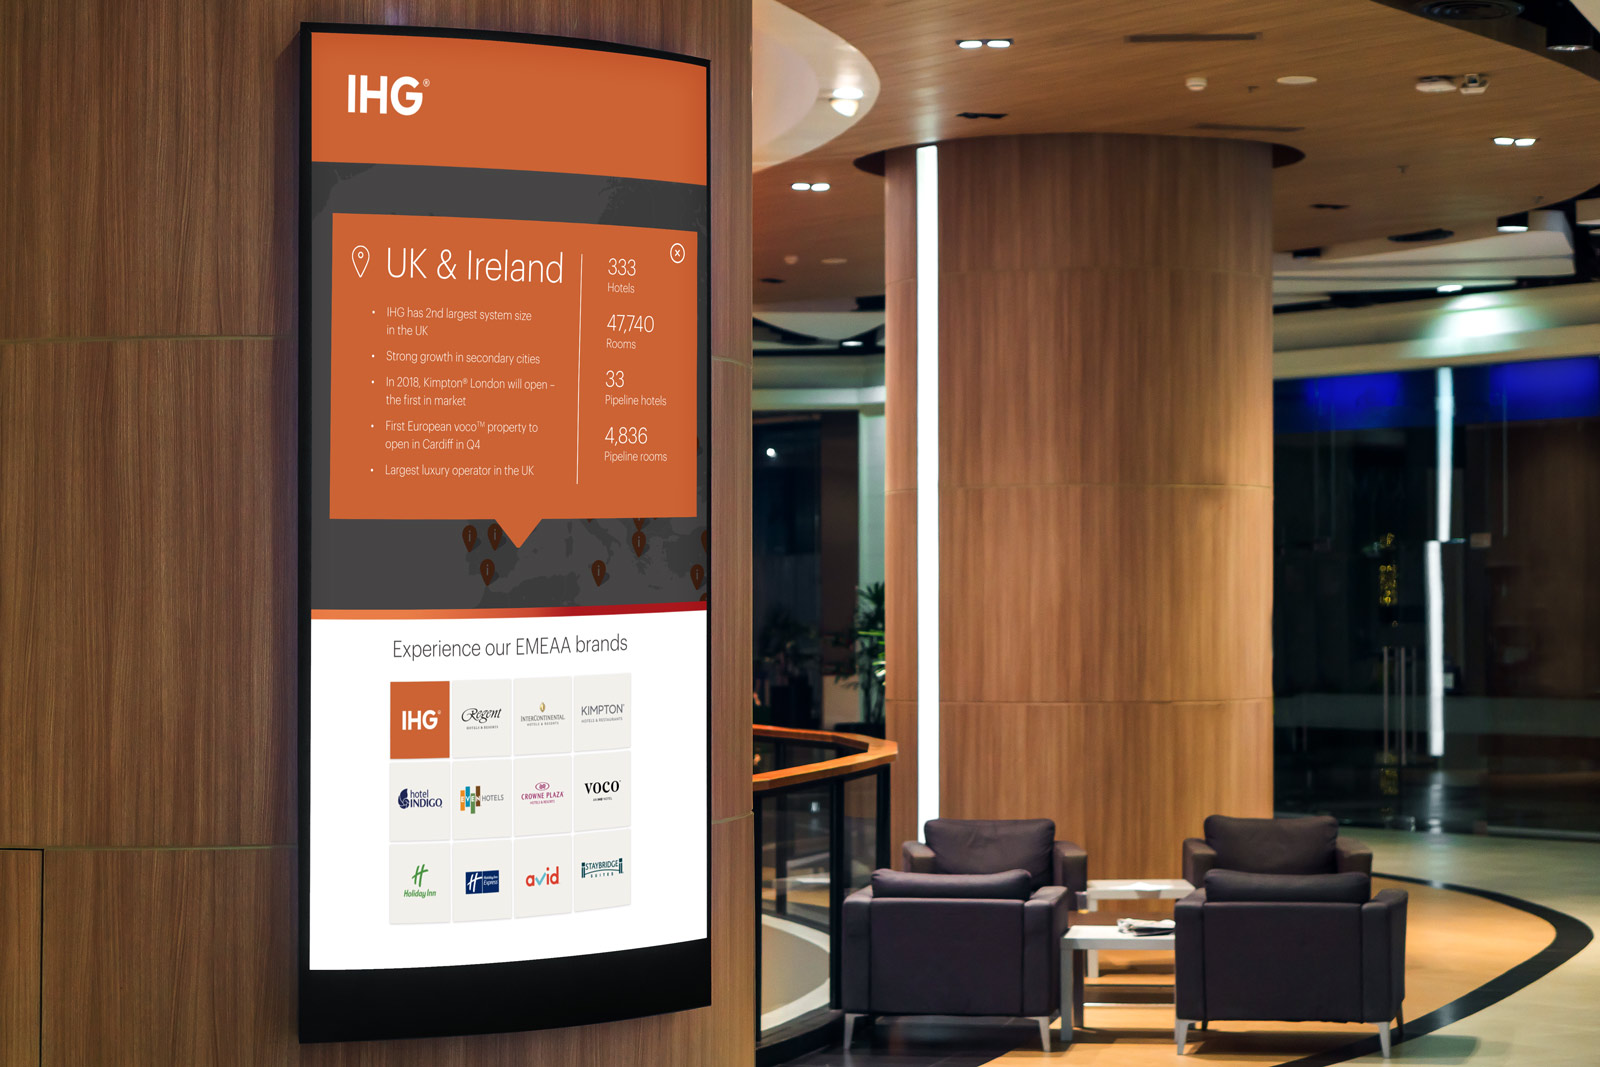 IHG digital interactive presentation displayed on large monitor in wooden panelled office